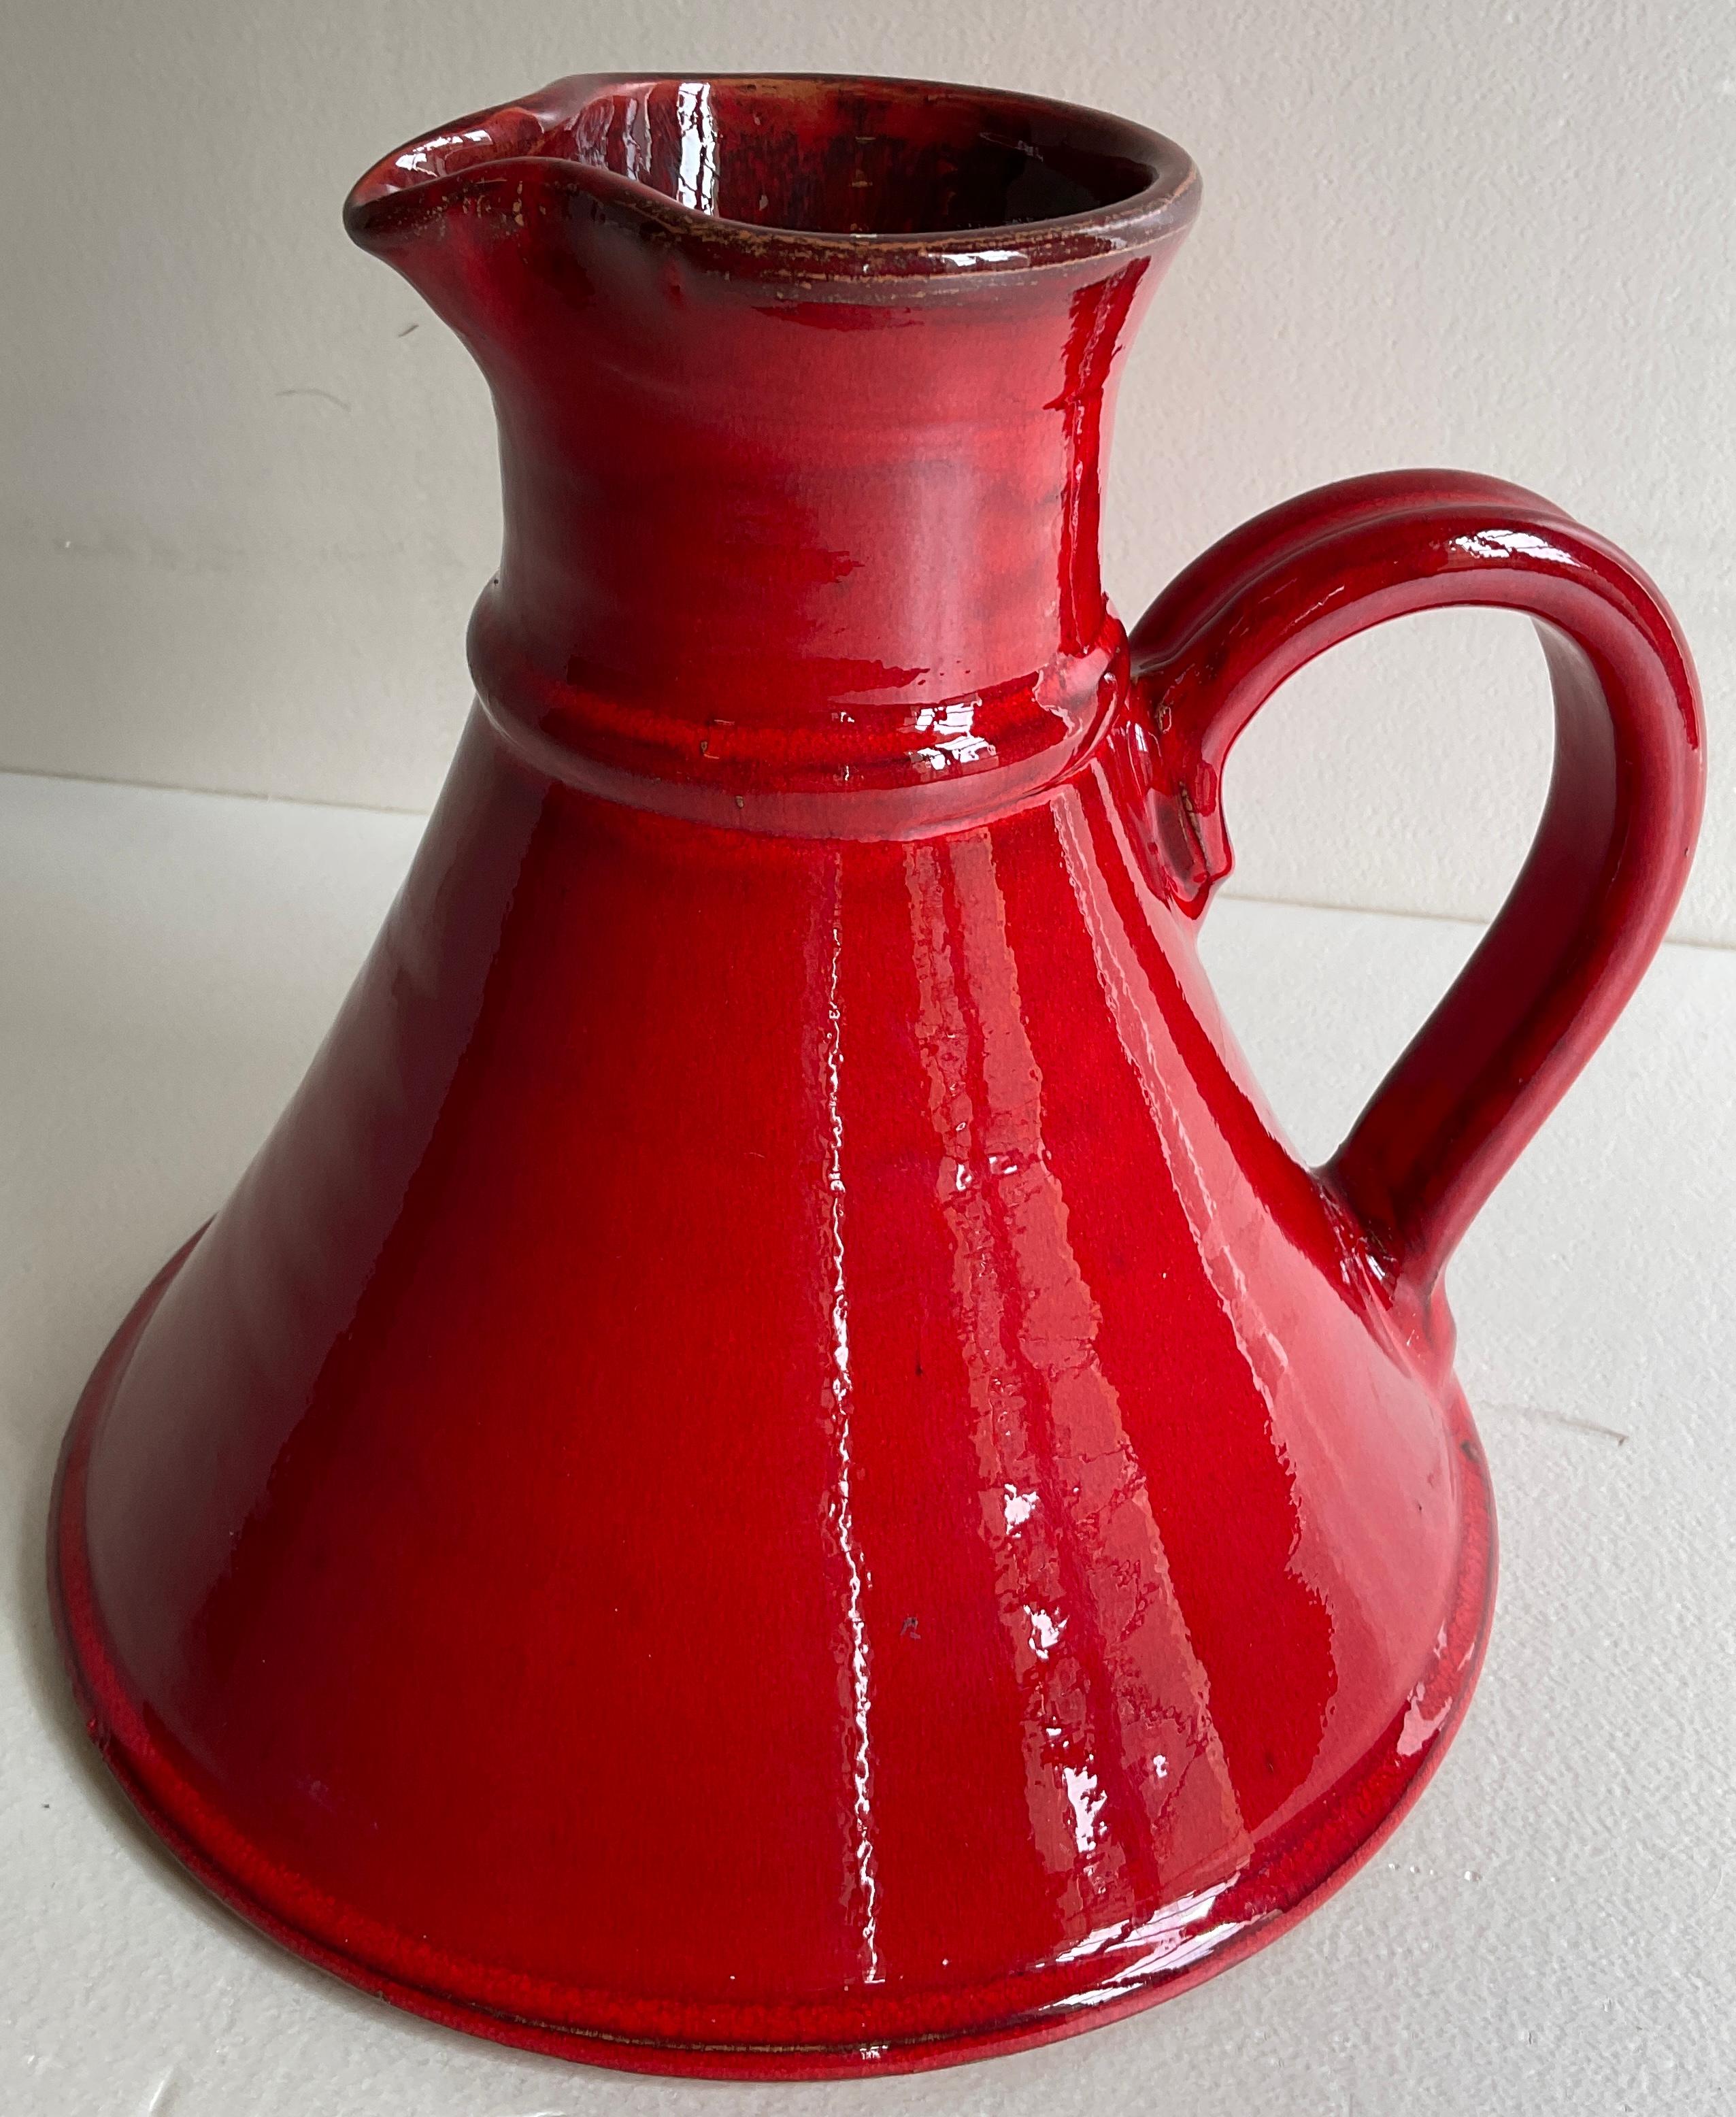 A very collectable mid-century vintage handled vase or pitcher. This decorative piece has classic modernist simplicity.

A rich red glazed finish makes this piece particularly interesting and pleasing to the eye. 

Measures: 7 1/2